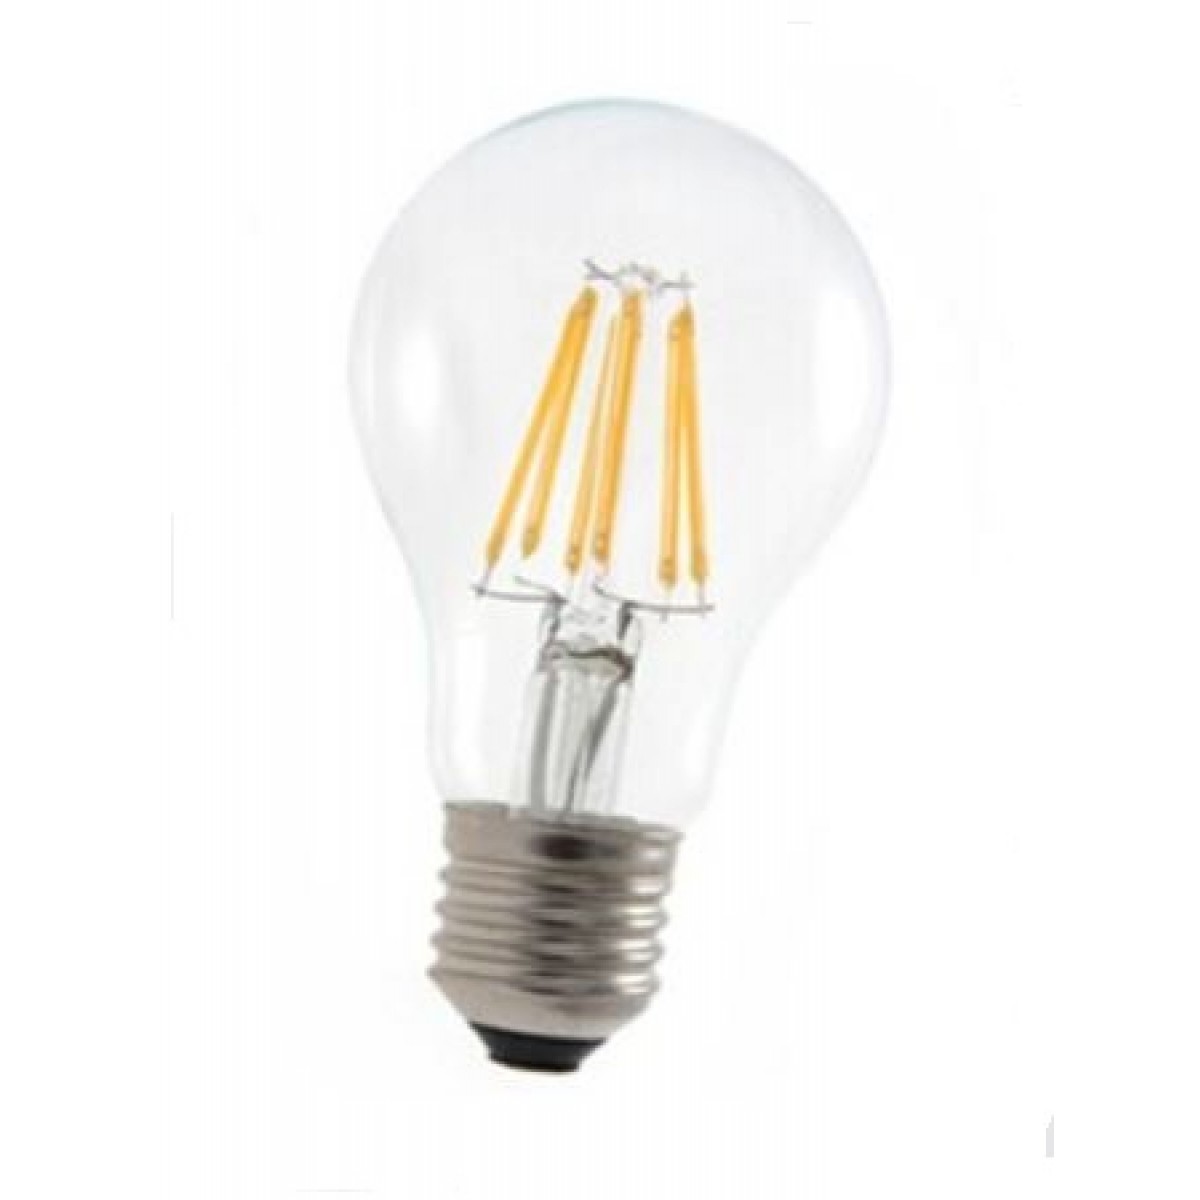 Daylight Asencia AN-03668 40-Watt Equivalent A19 Clear All Glass Vintage Filament Dimmable LED Light Bulb 6-Pack 5000K Renewed